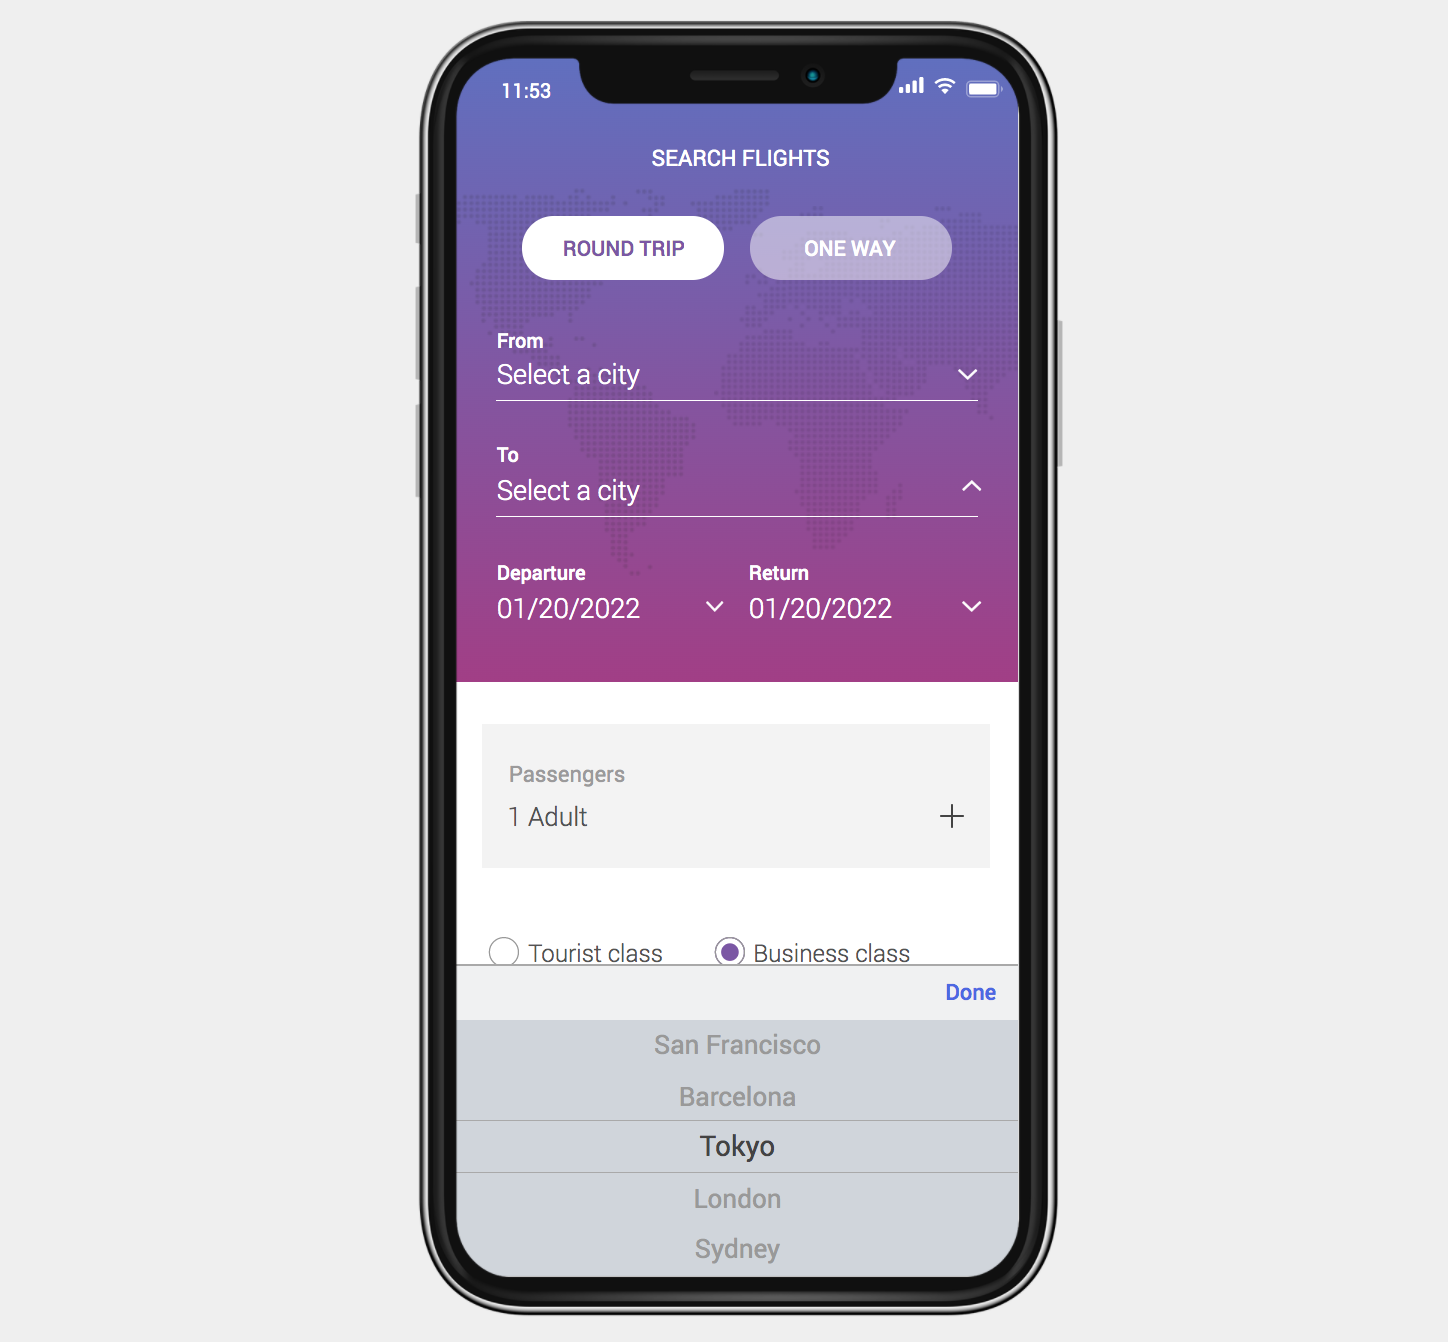 You can click through this prototype of a flight booking app